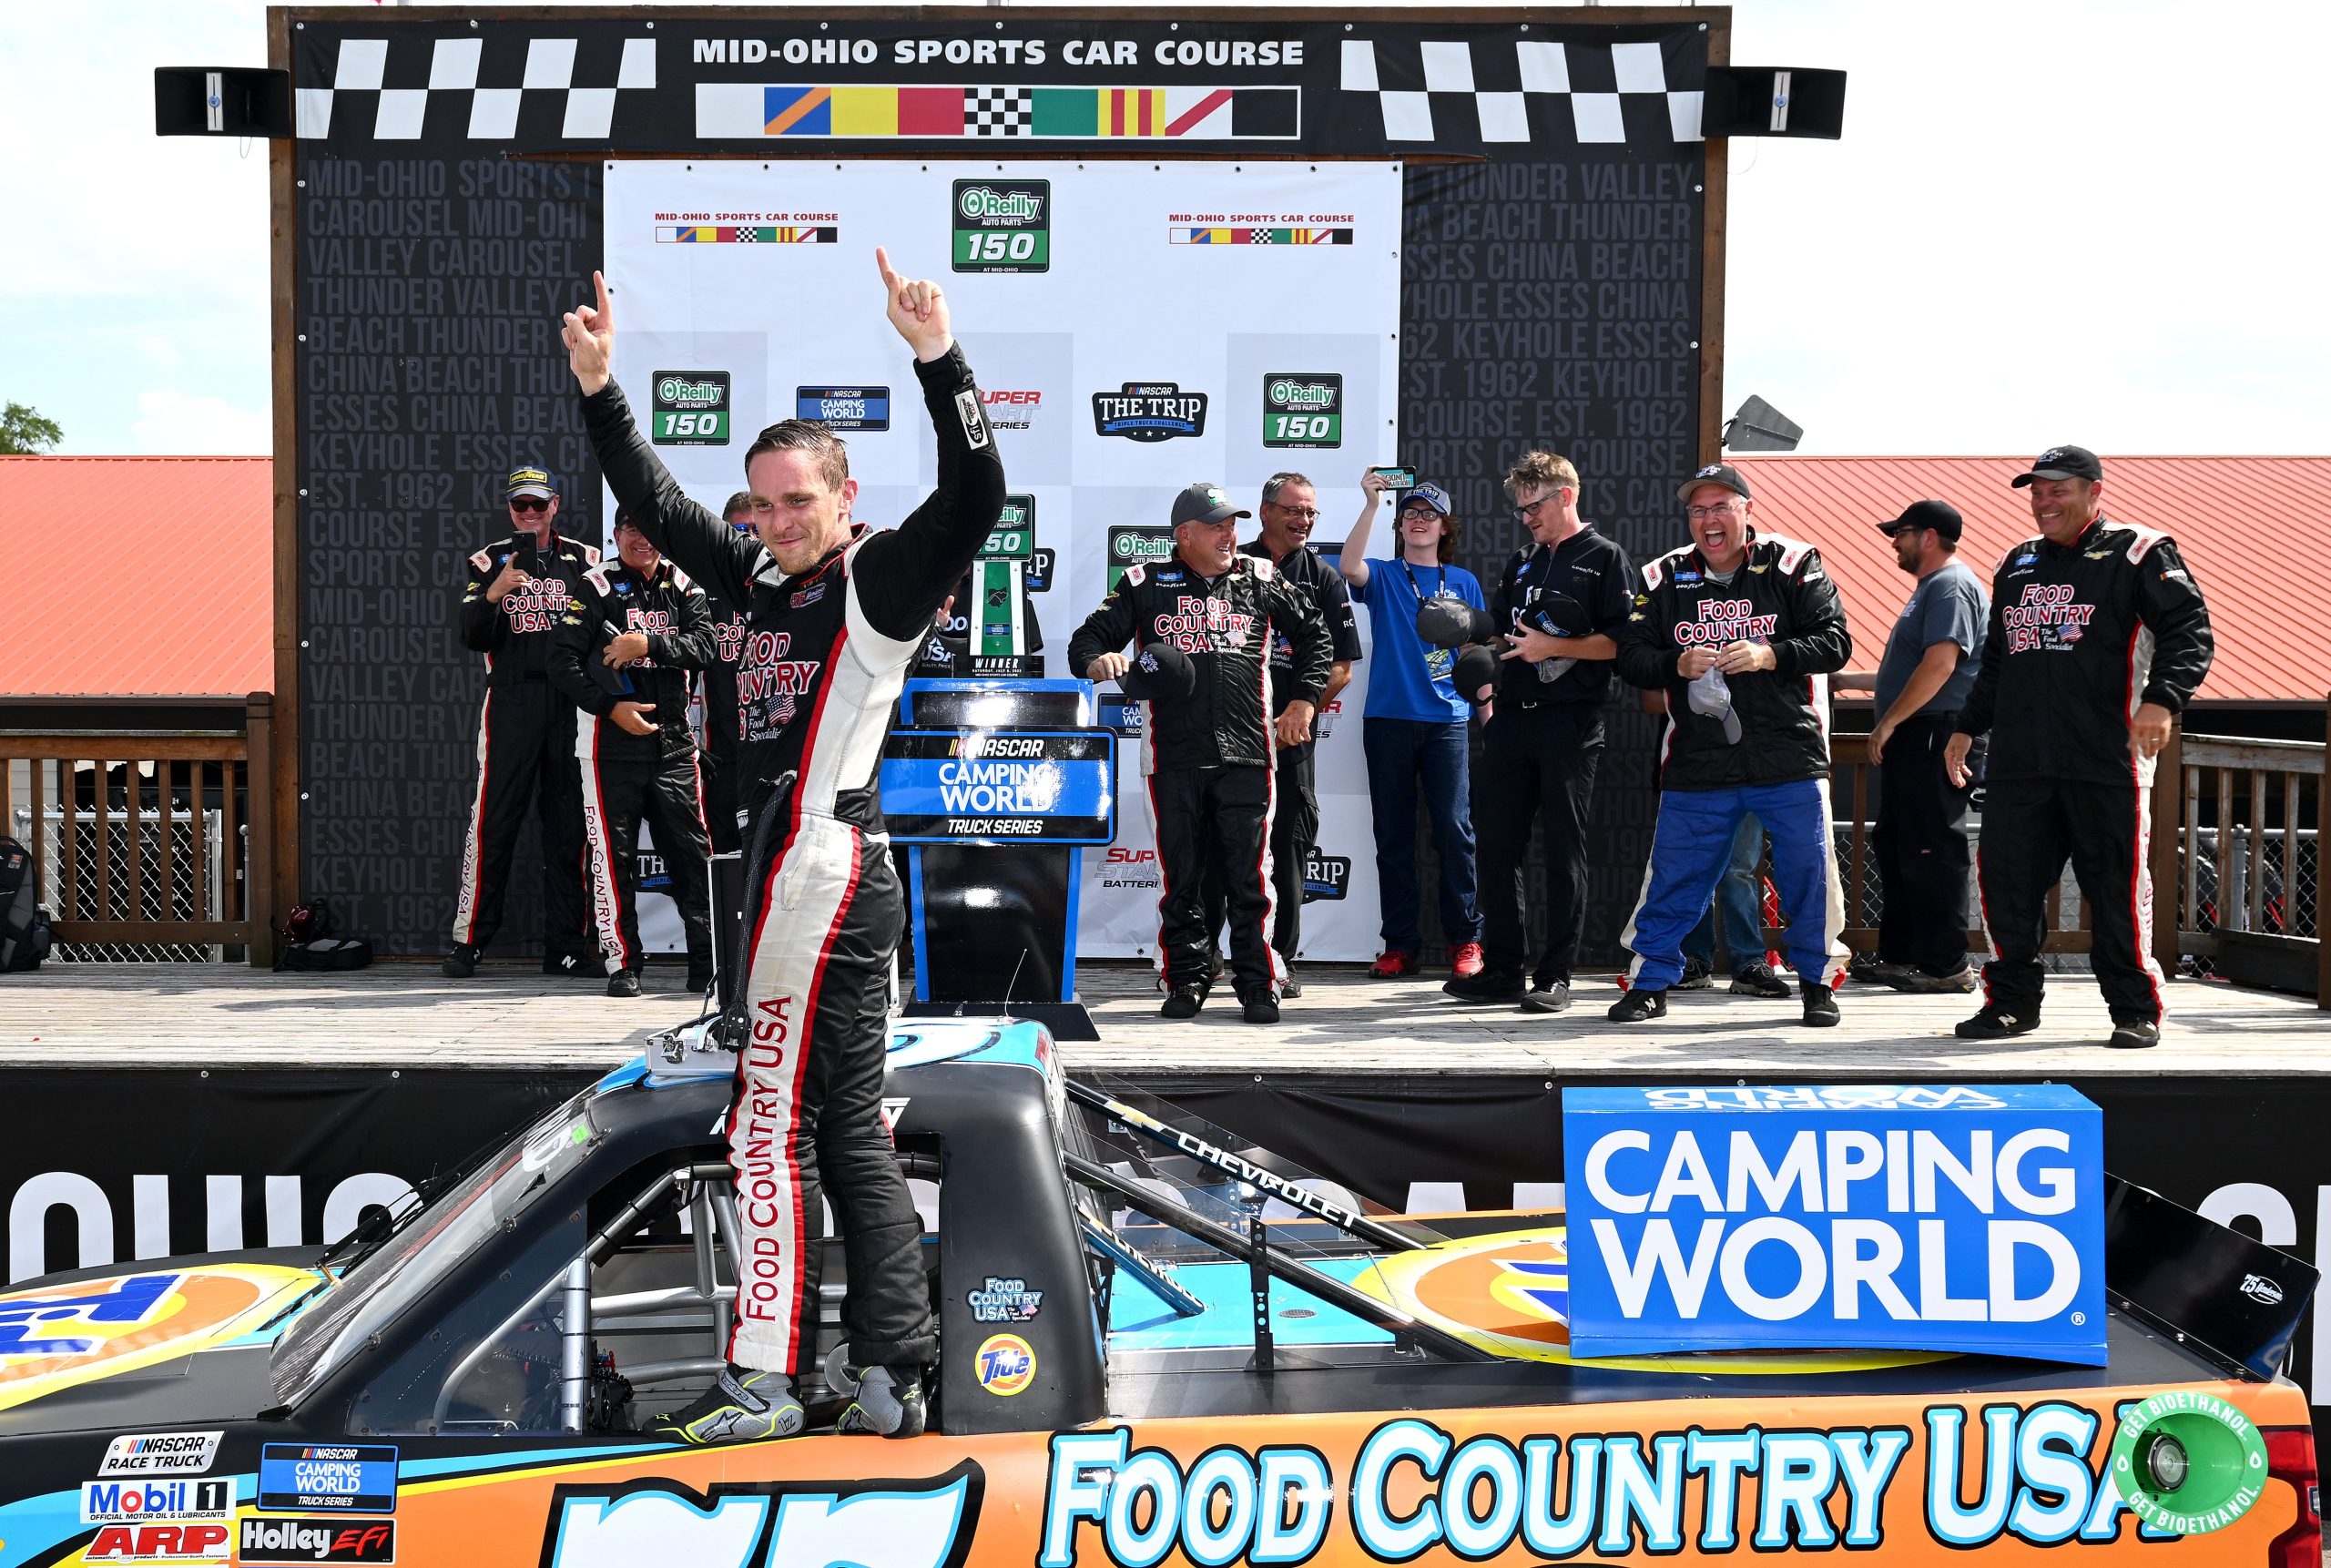 LEXINGTON, OHIO - JULY 09: Parker Kligerman, driver of the #75 Food Country USA/Tide Chevrolet, celebrates in victory lane after winning the NASCAR Camping World Truck Series O'Reilly Auto Parts 150 at Mid-Ohio Sports Car Course on July 09, 2022 in Lexington, Ohio. (Photo by Ben Jackson/Getty Images)